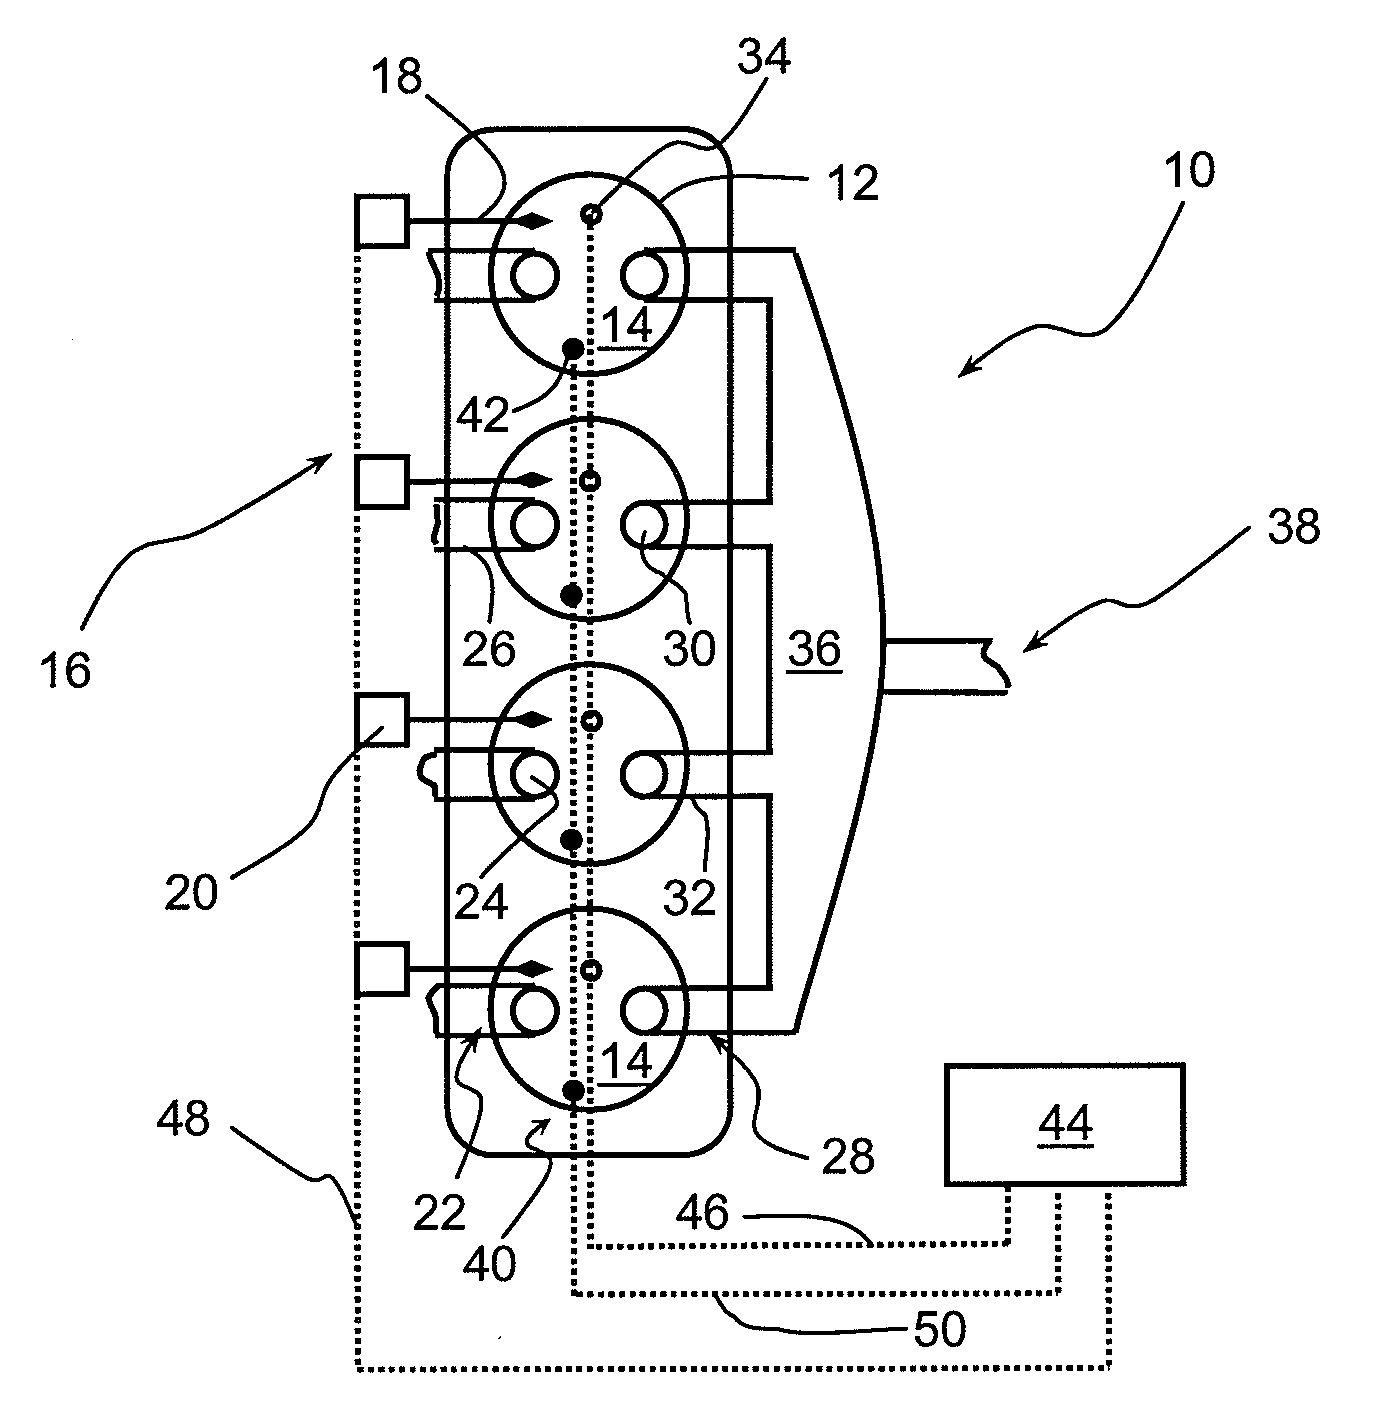 Method of controlling the combustion phase of an internal-combustion engine, notably a gasoline type direct-injection supercharged engine